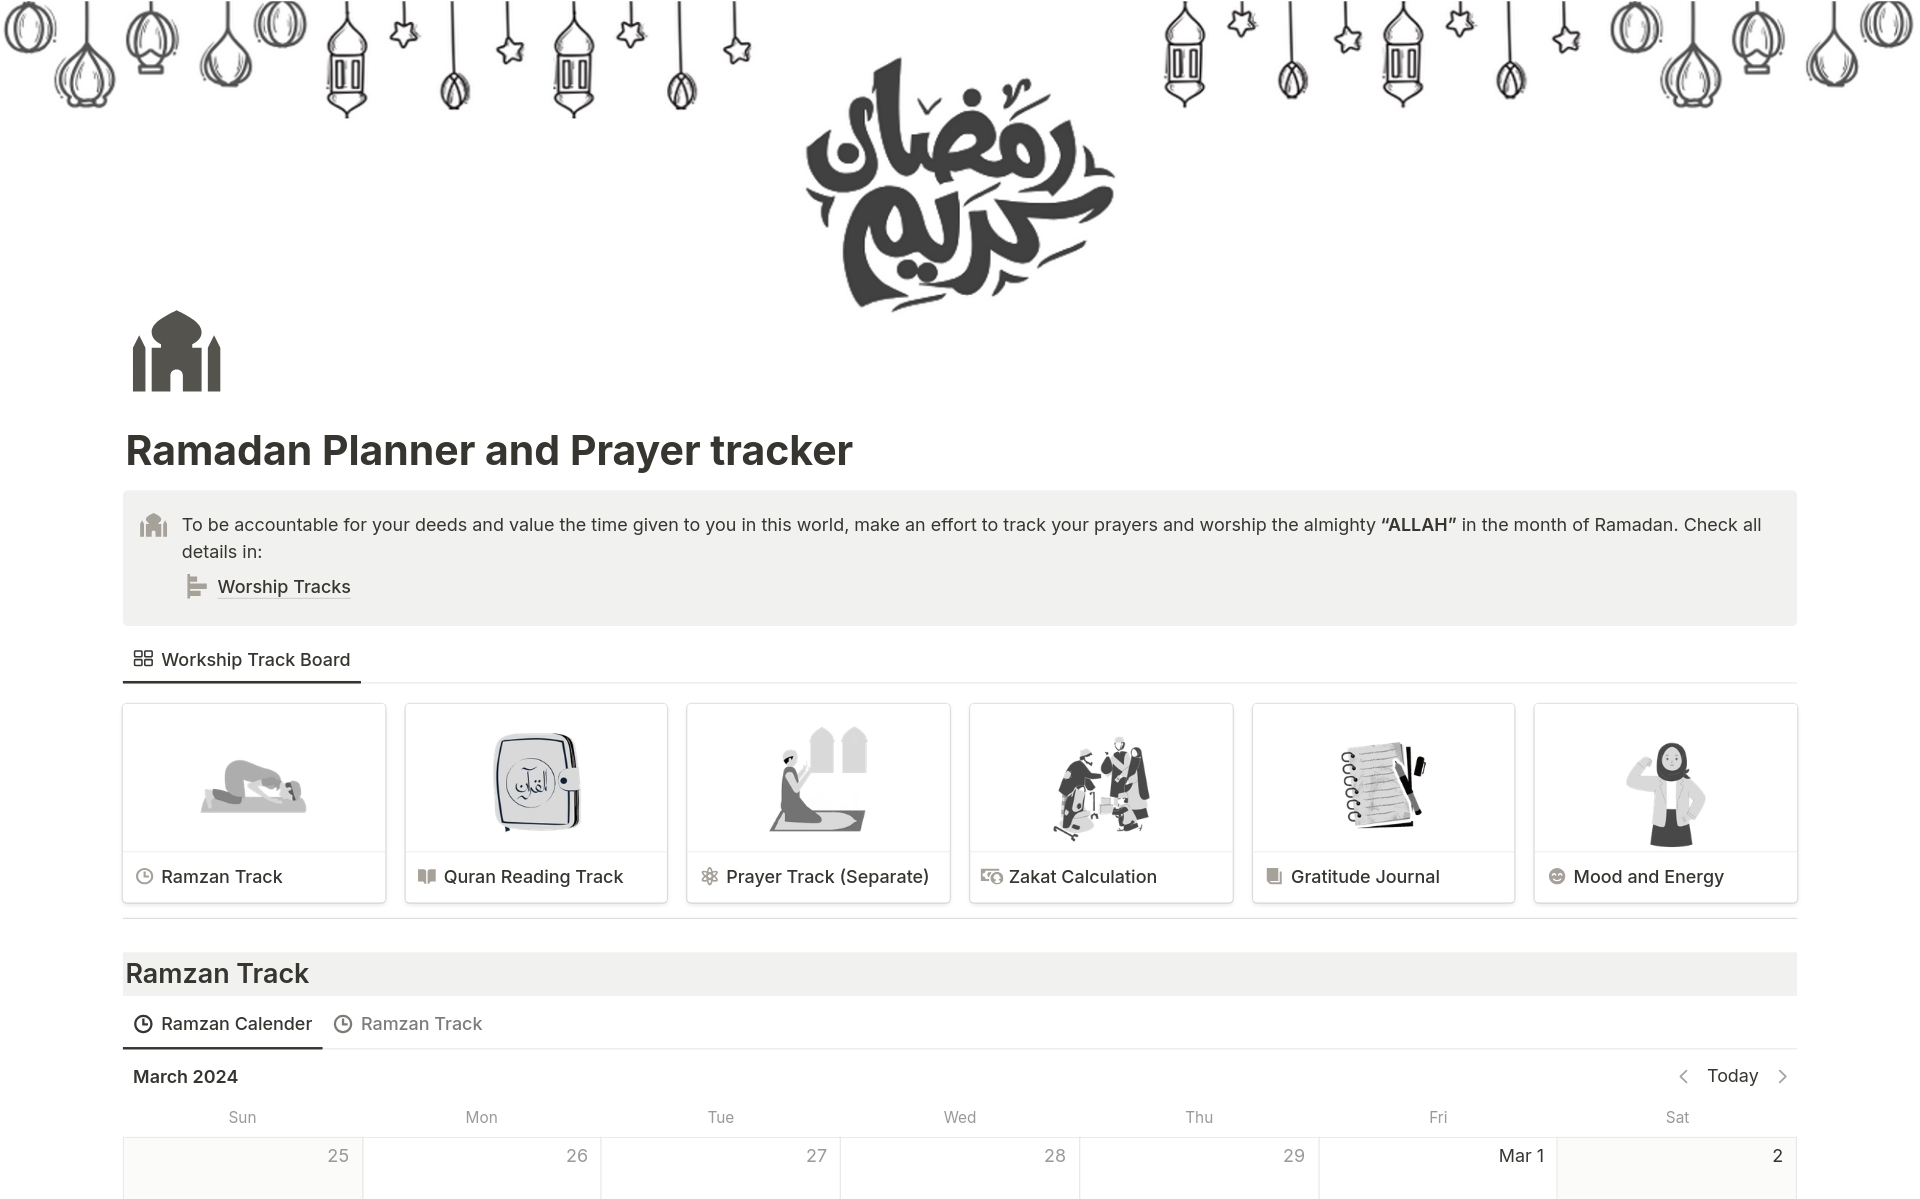 Stay organised and spiritually connected throughout the blessed month of Ramadan with our comprehensive Ramadan planner and prayer tracker template. This all-in-one digital tool helps you plan your Ramadan activities, track your prayers, and maximise the blessings of this sacred 